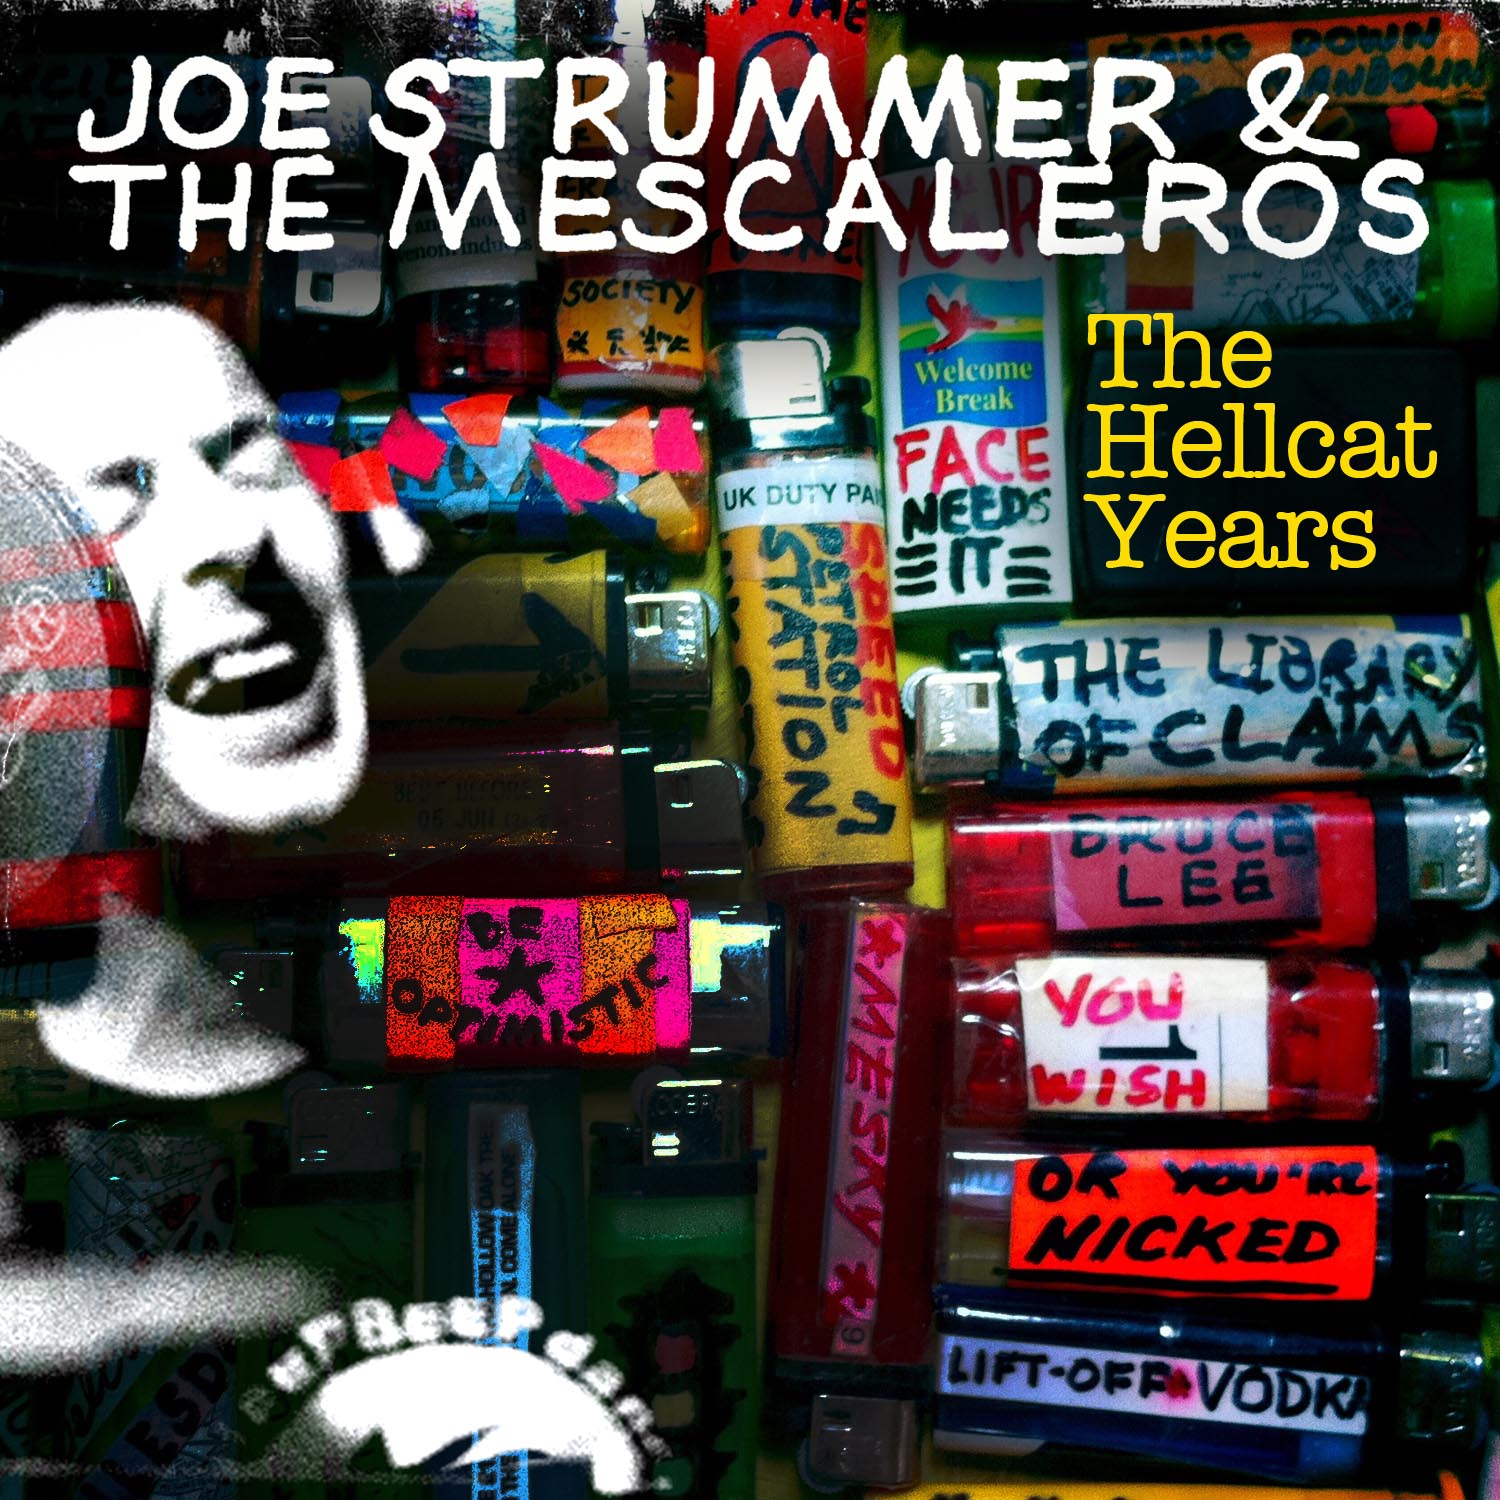 Joe Strummer and The Mescaleros Release Re-Issues and Rarities